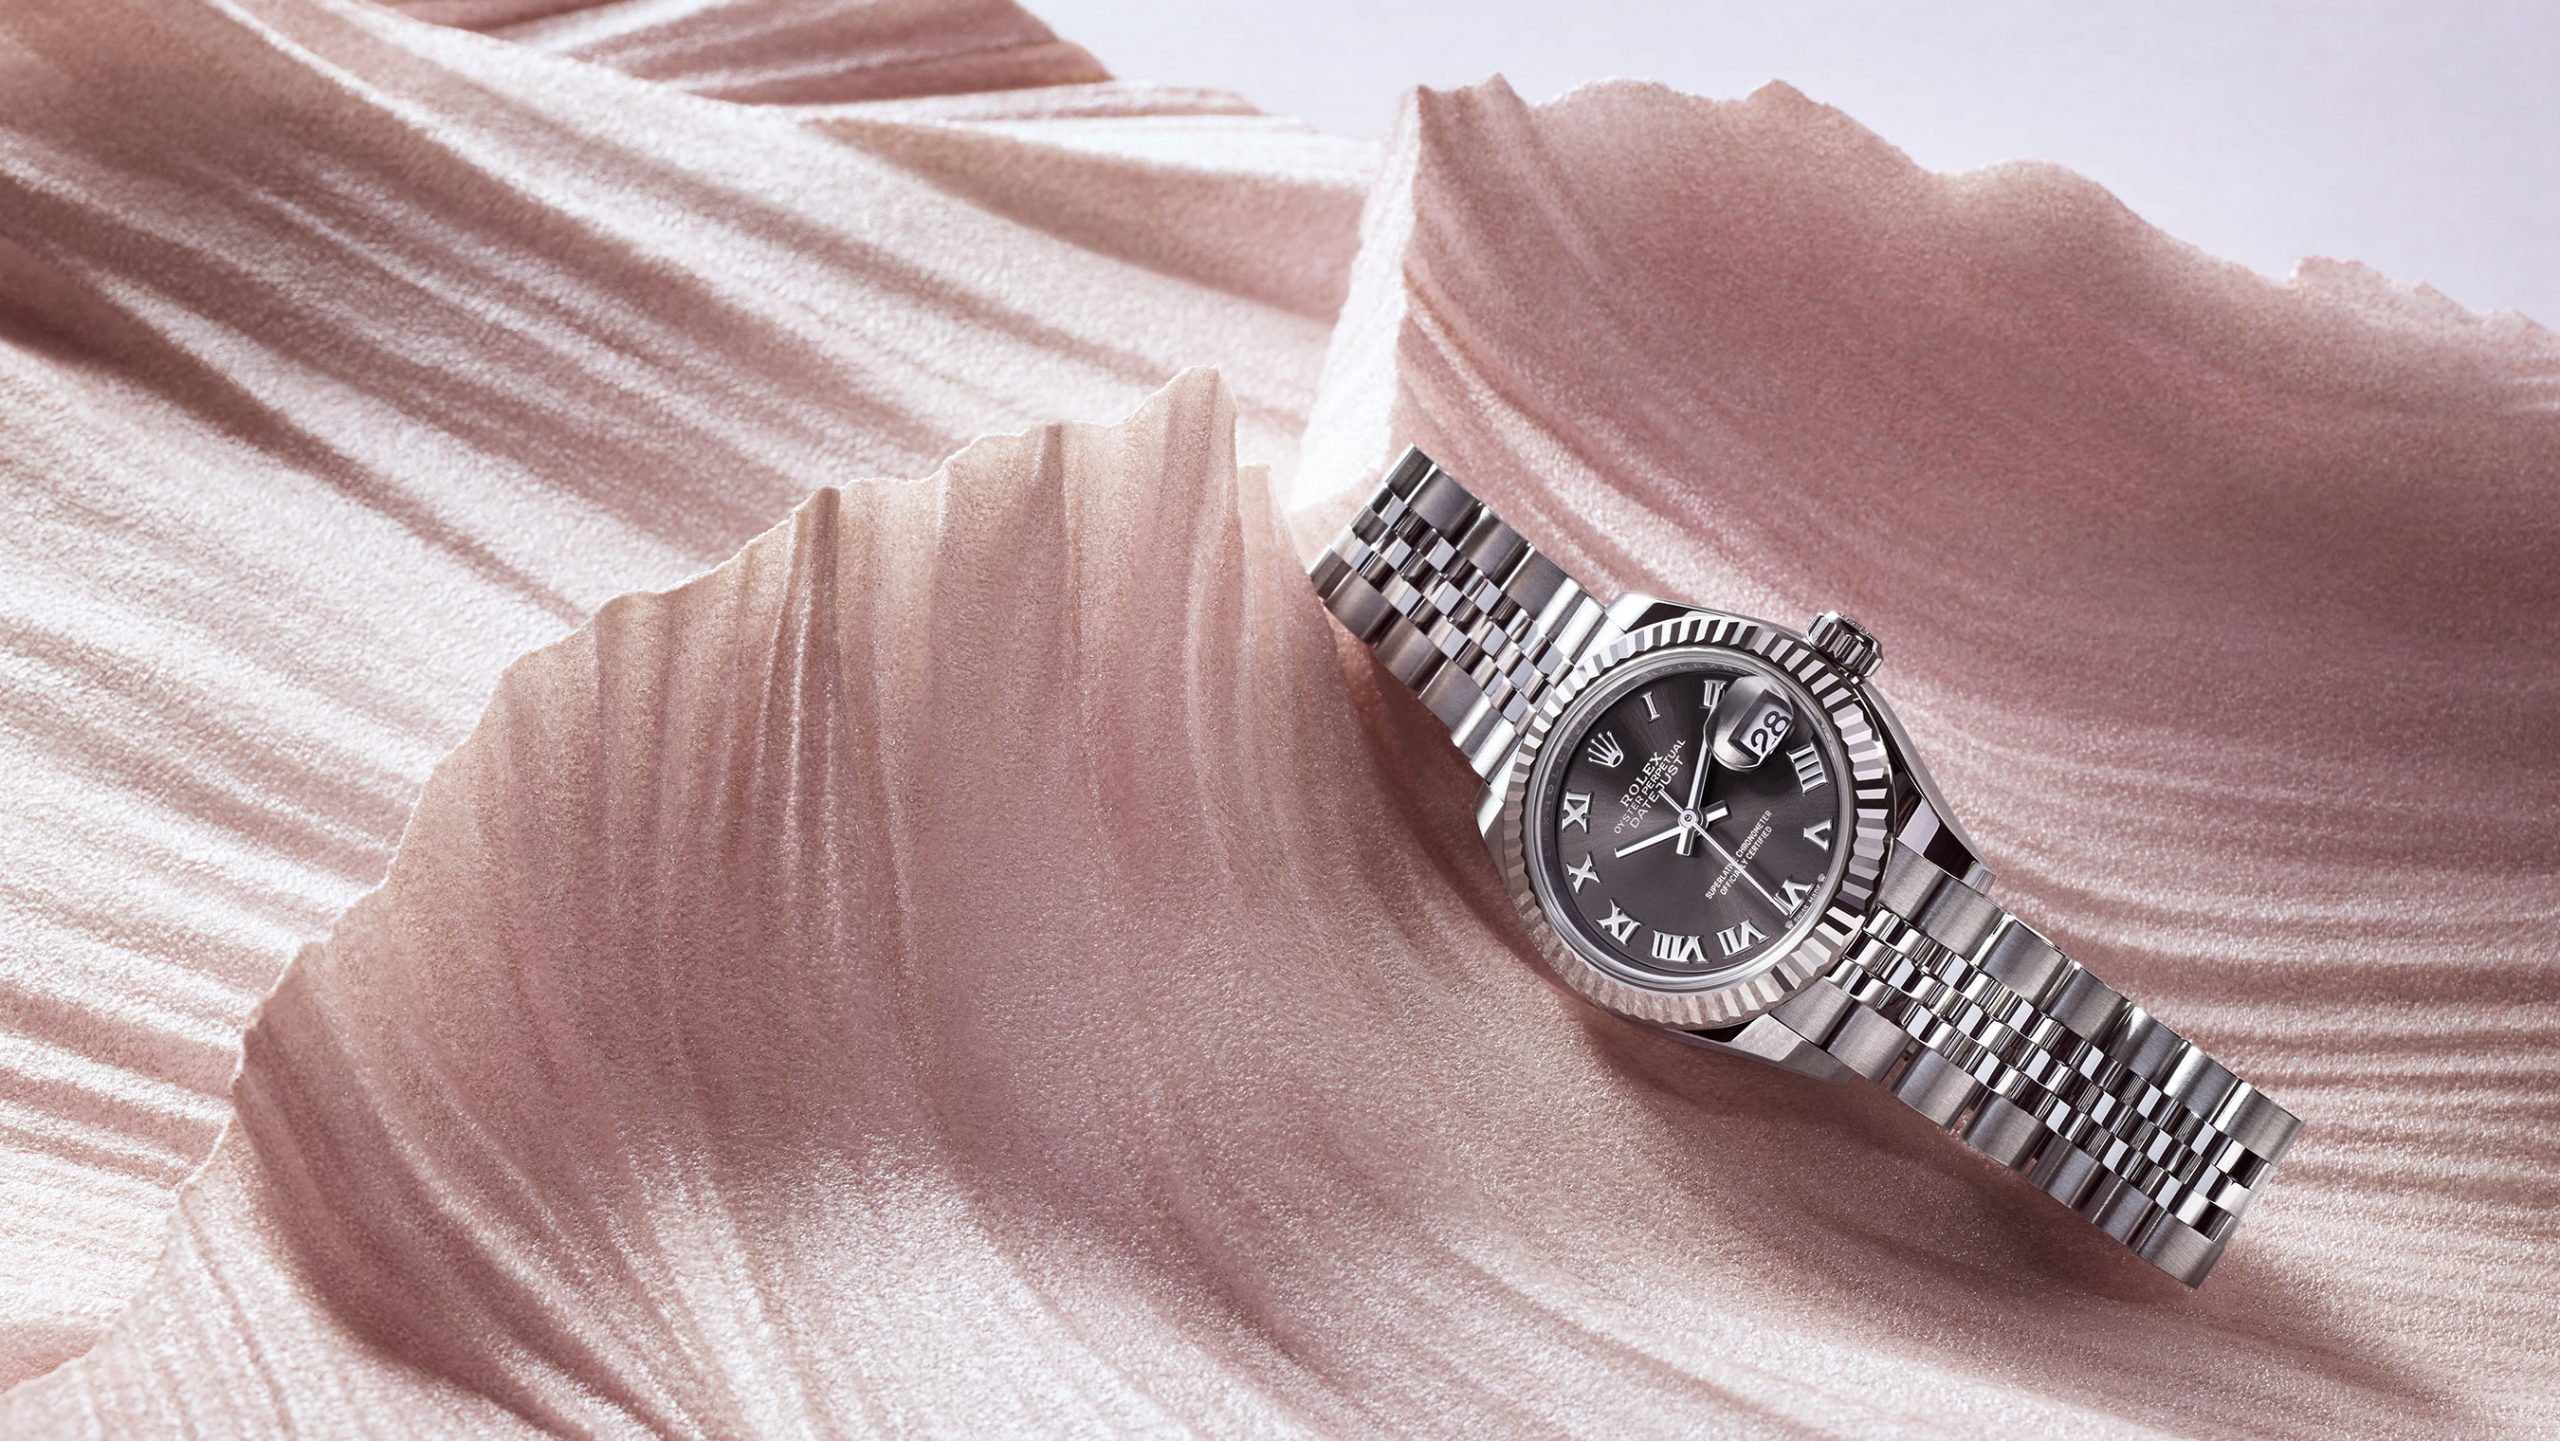 Rolex Lady Datejust in Rolesor steel against pink textured background